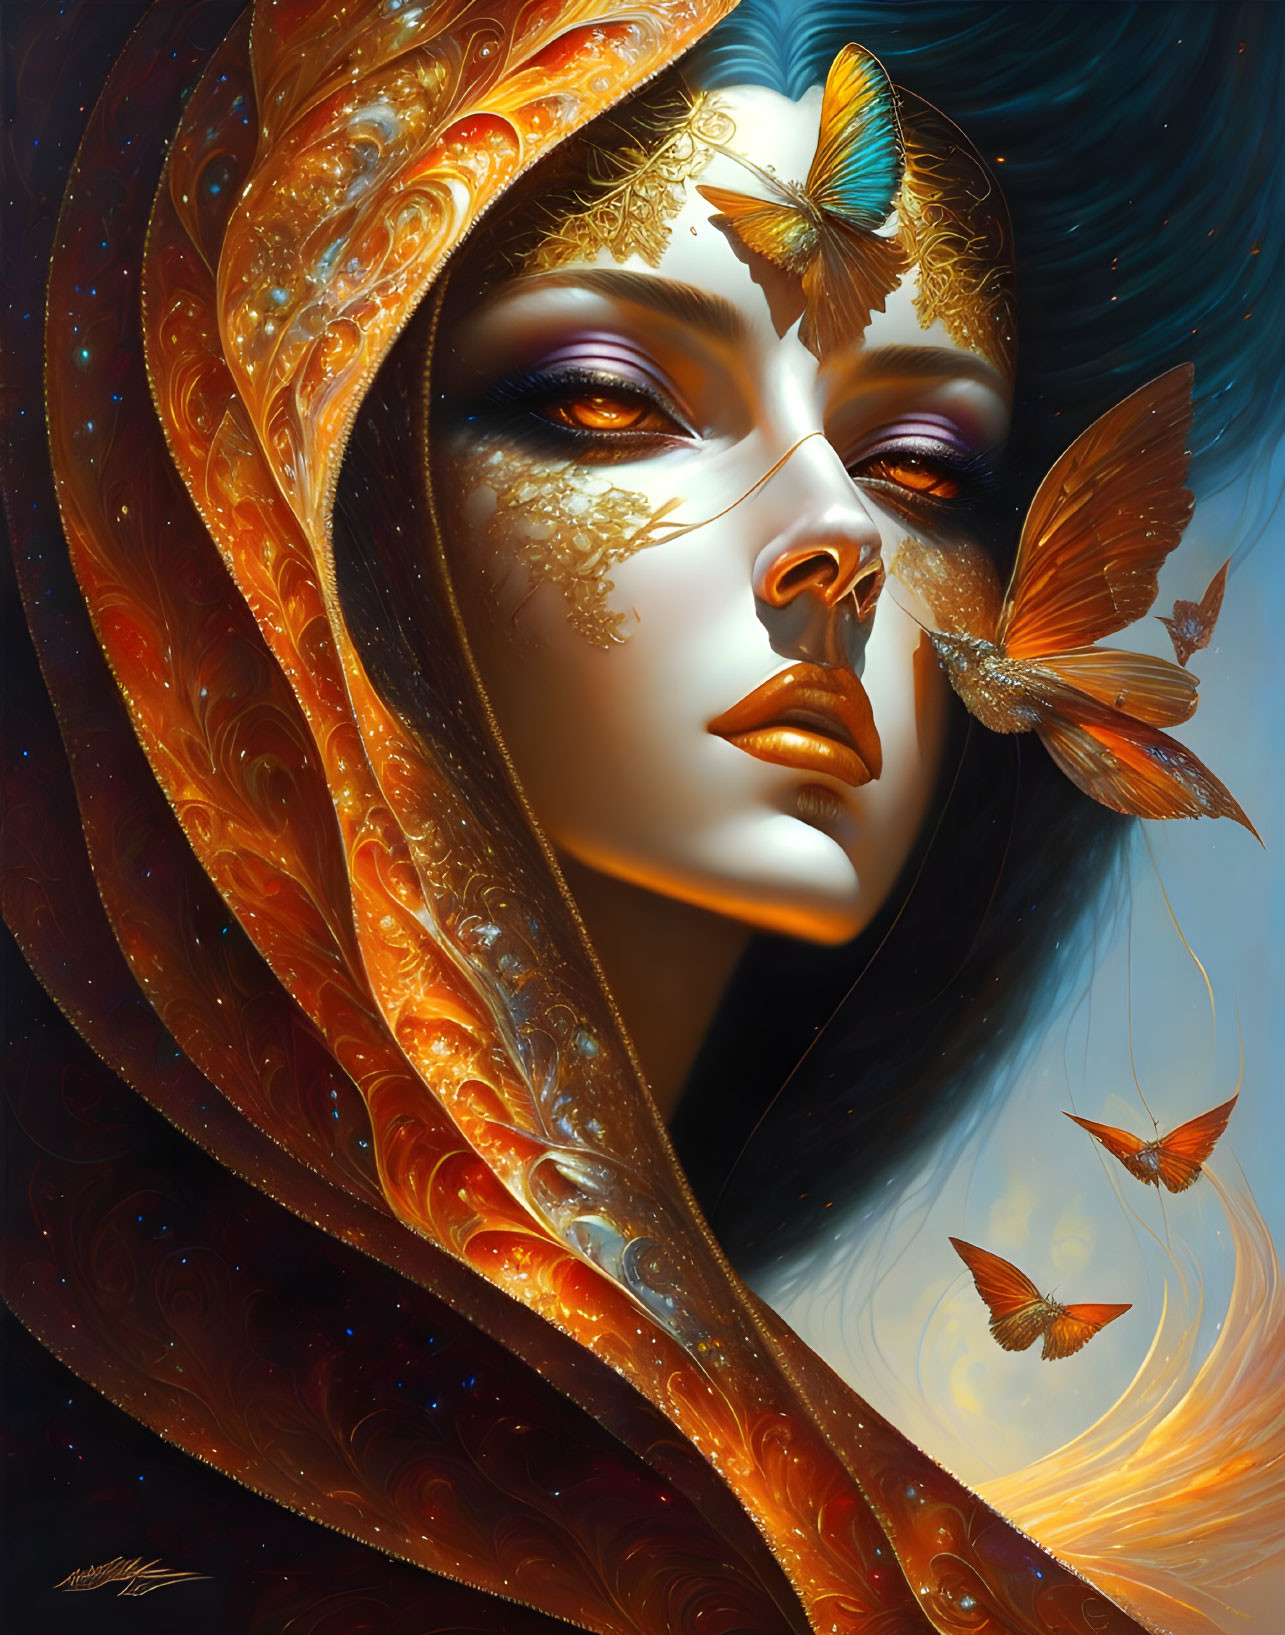 Detailed digital painting of woman with butterflies: vibrant colors, intricate patterns, mystical aura